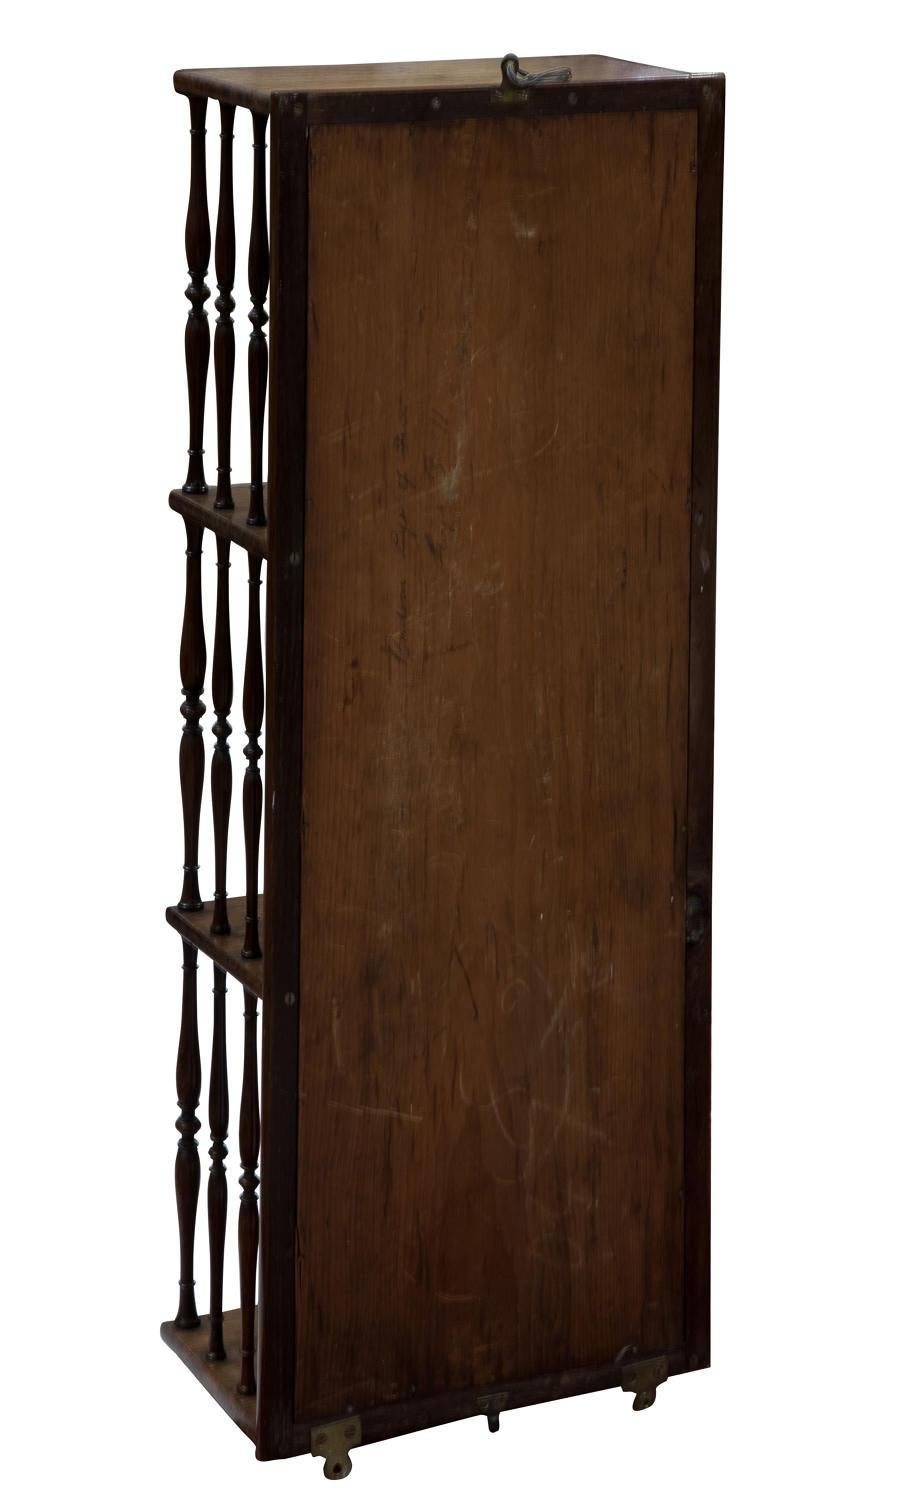 British Regency Rosewood Wall Mirror with Oak Shelves Banded with Walnut Burr circa 1820 For Sale